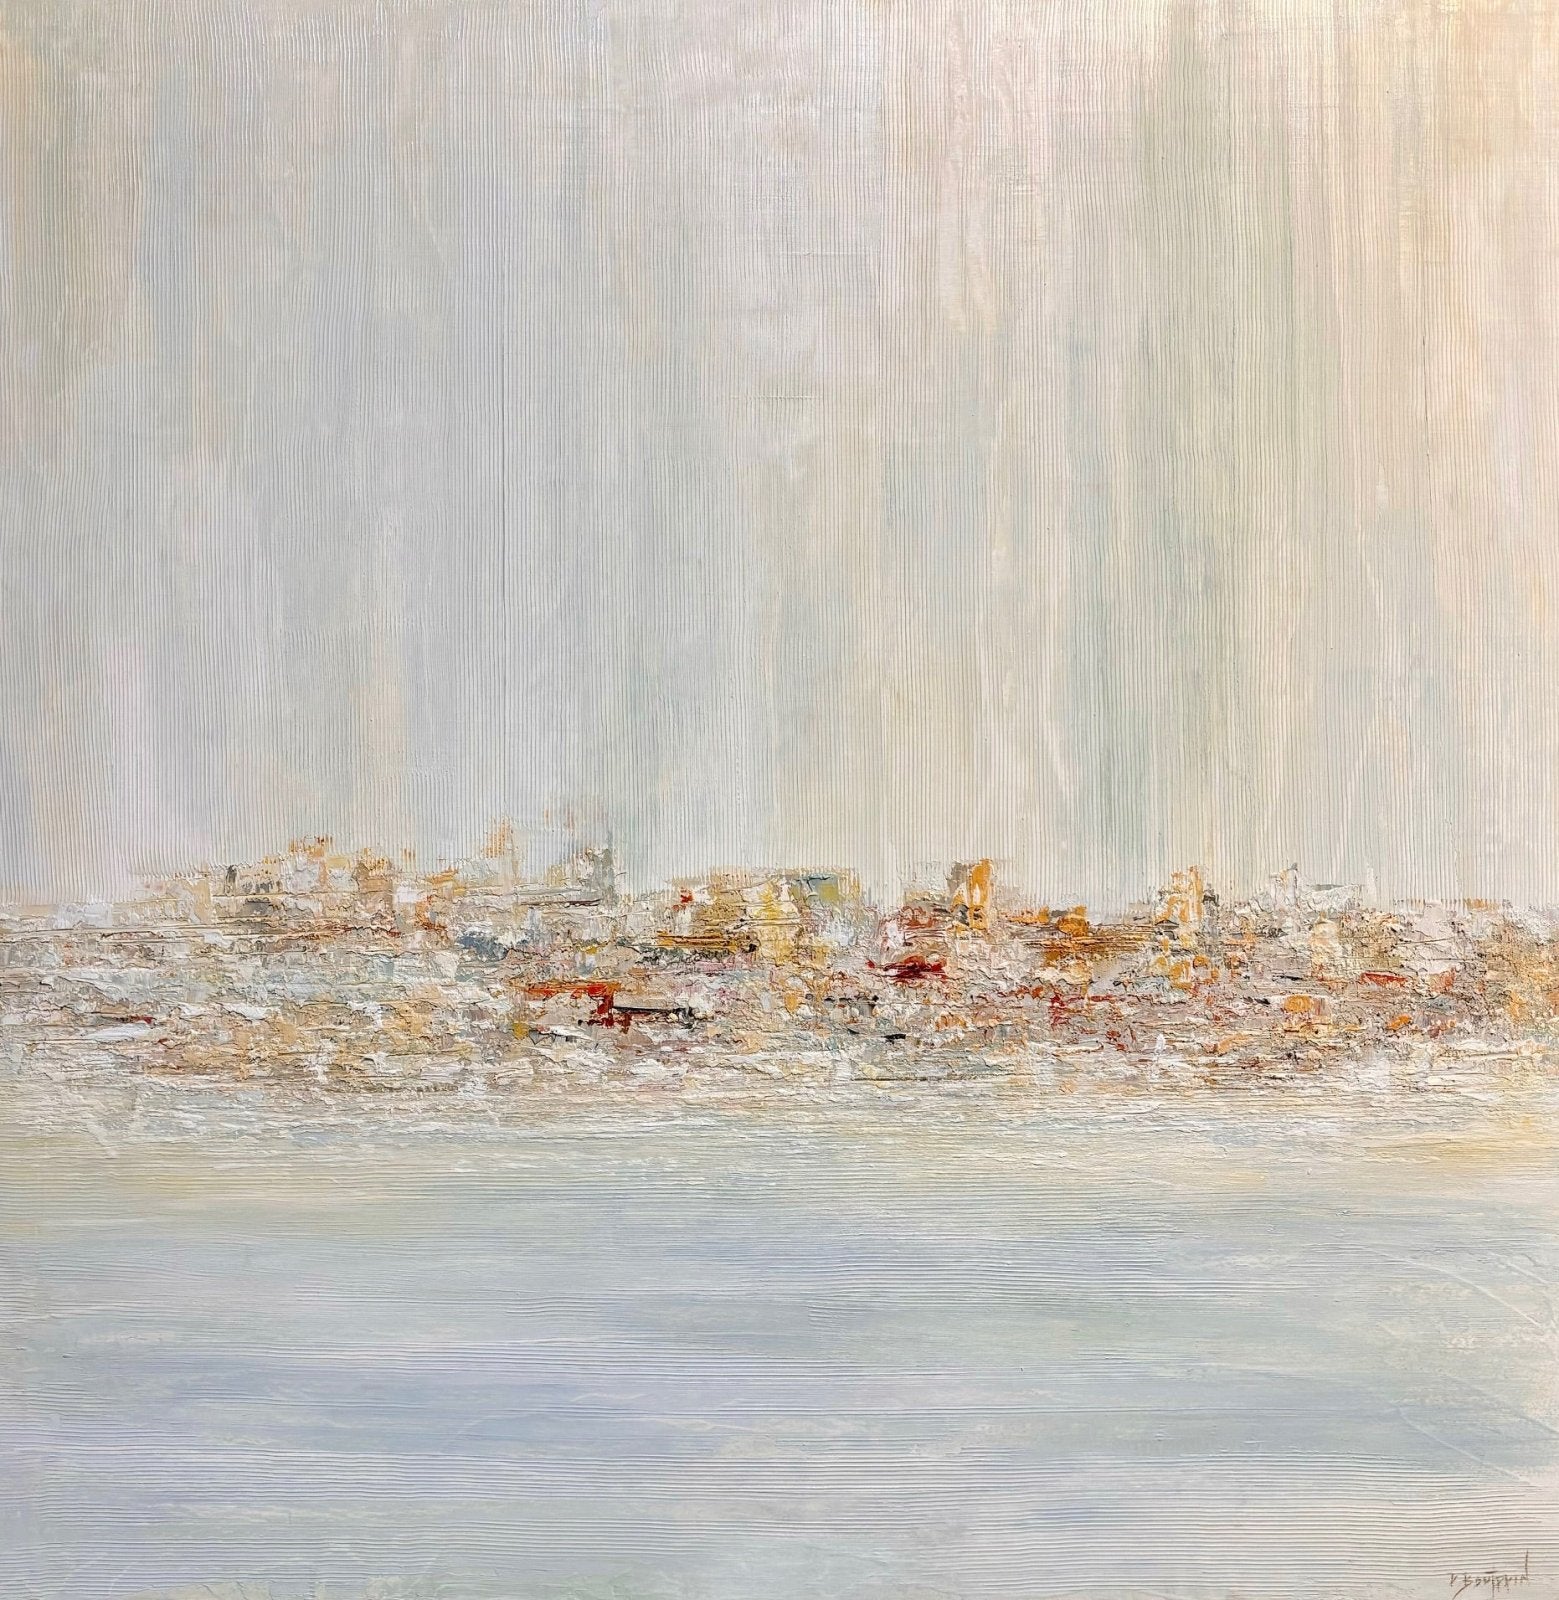 Charleston Harbor by Pascal Bouterin at LePrince Galleries